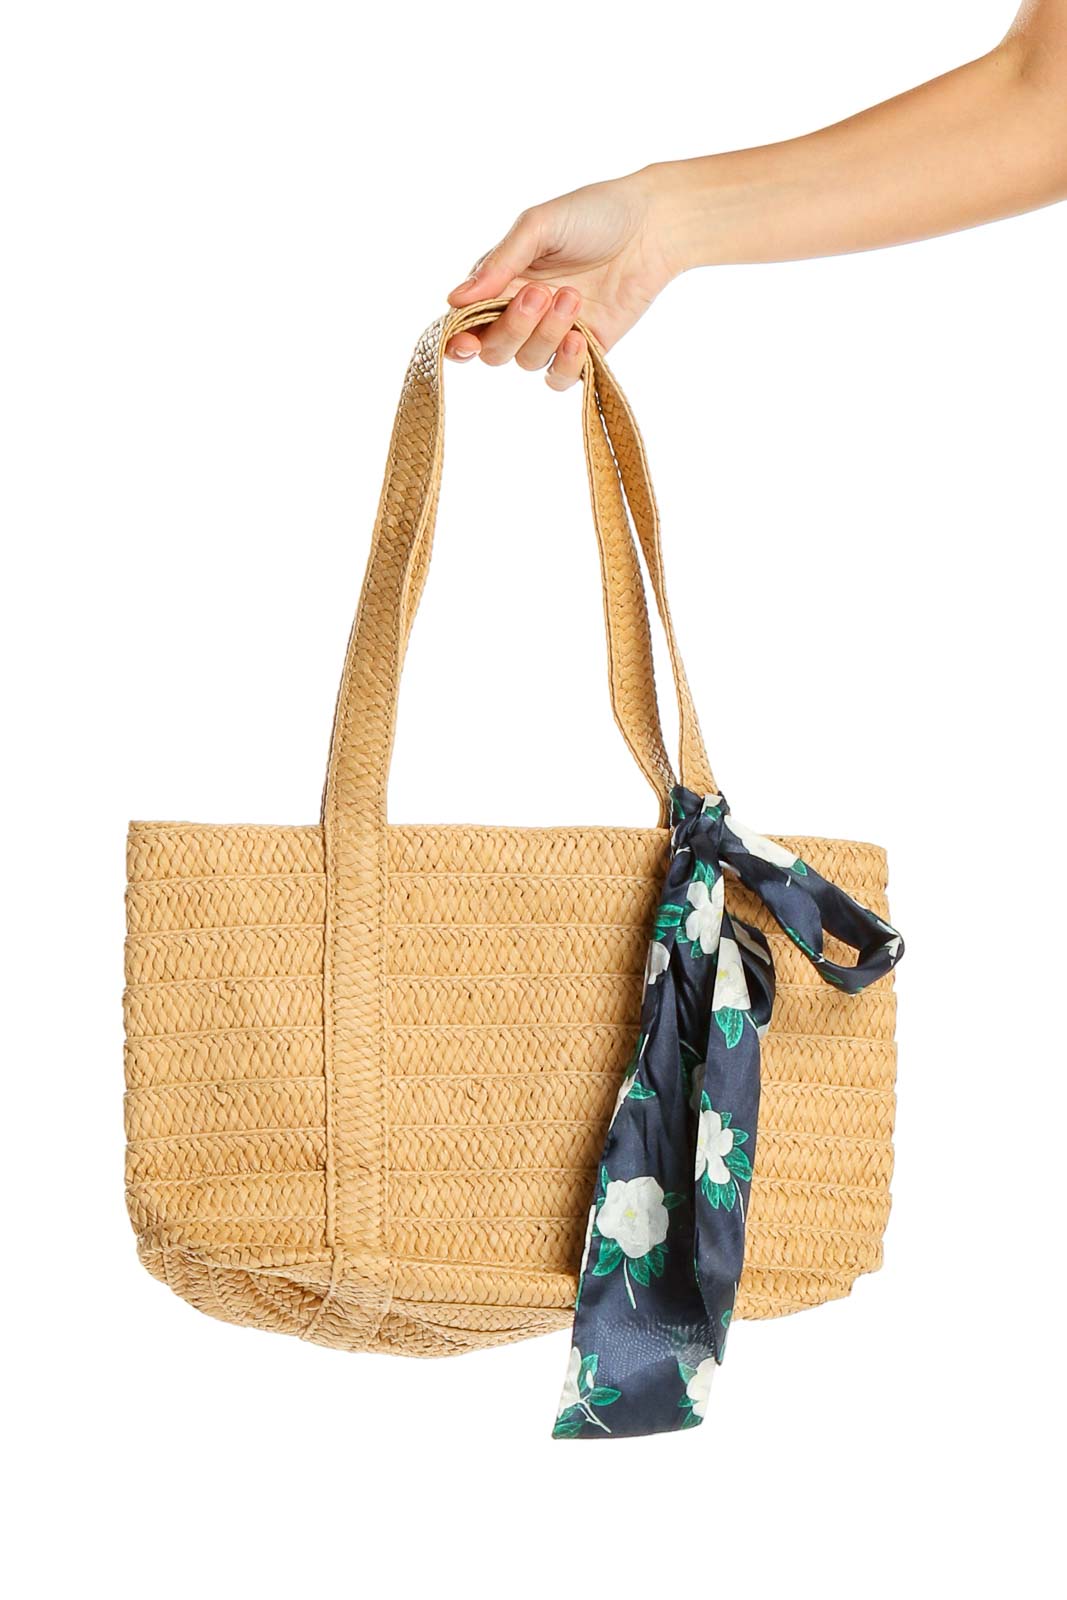 Beige Whicker Tote Bag With Blue Ribbon Front